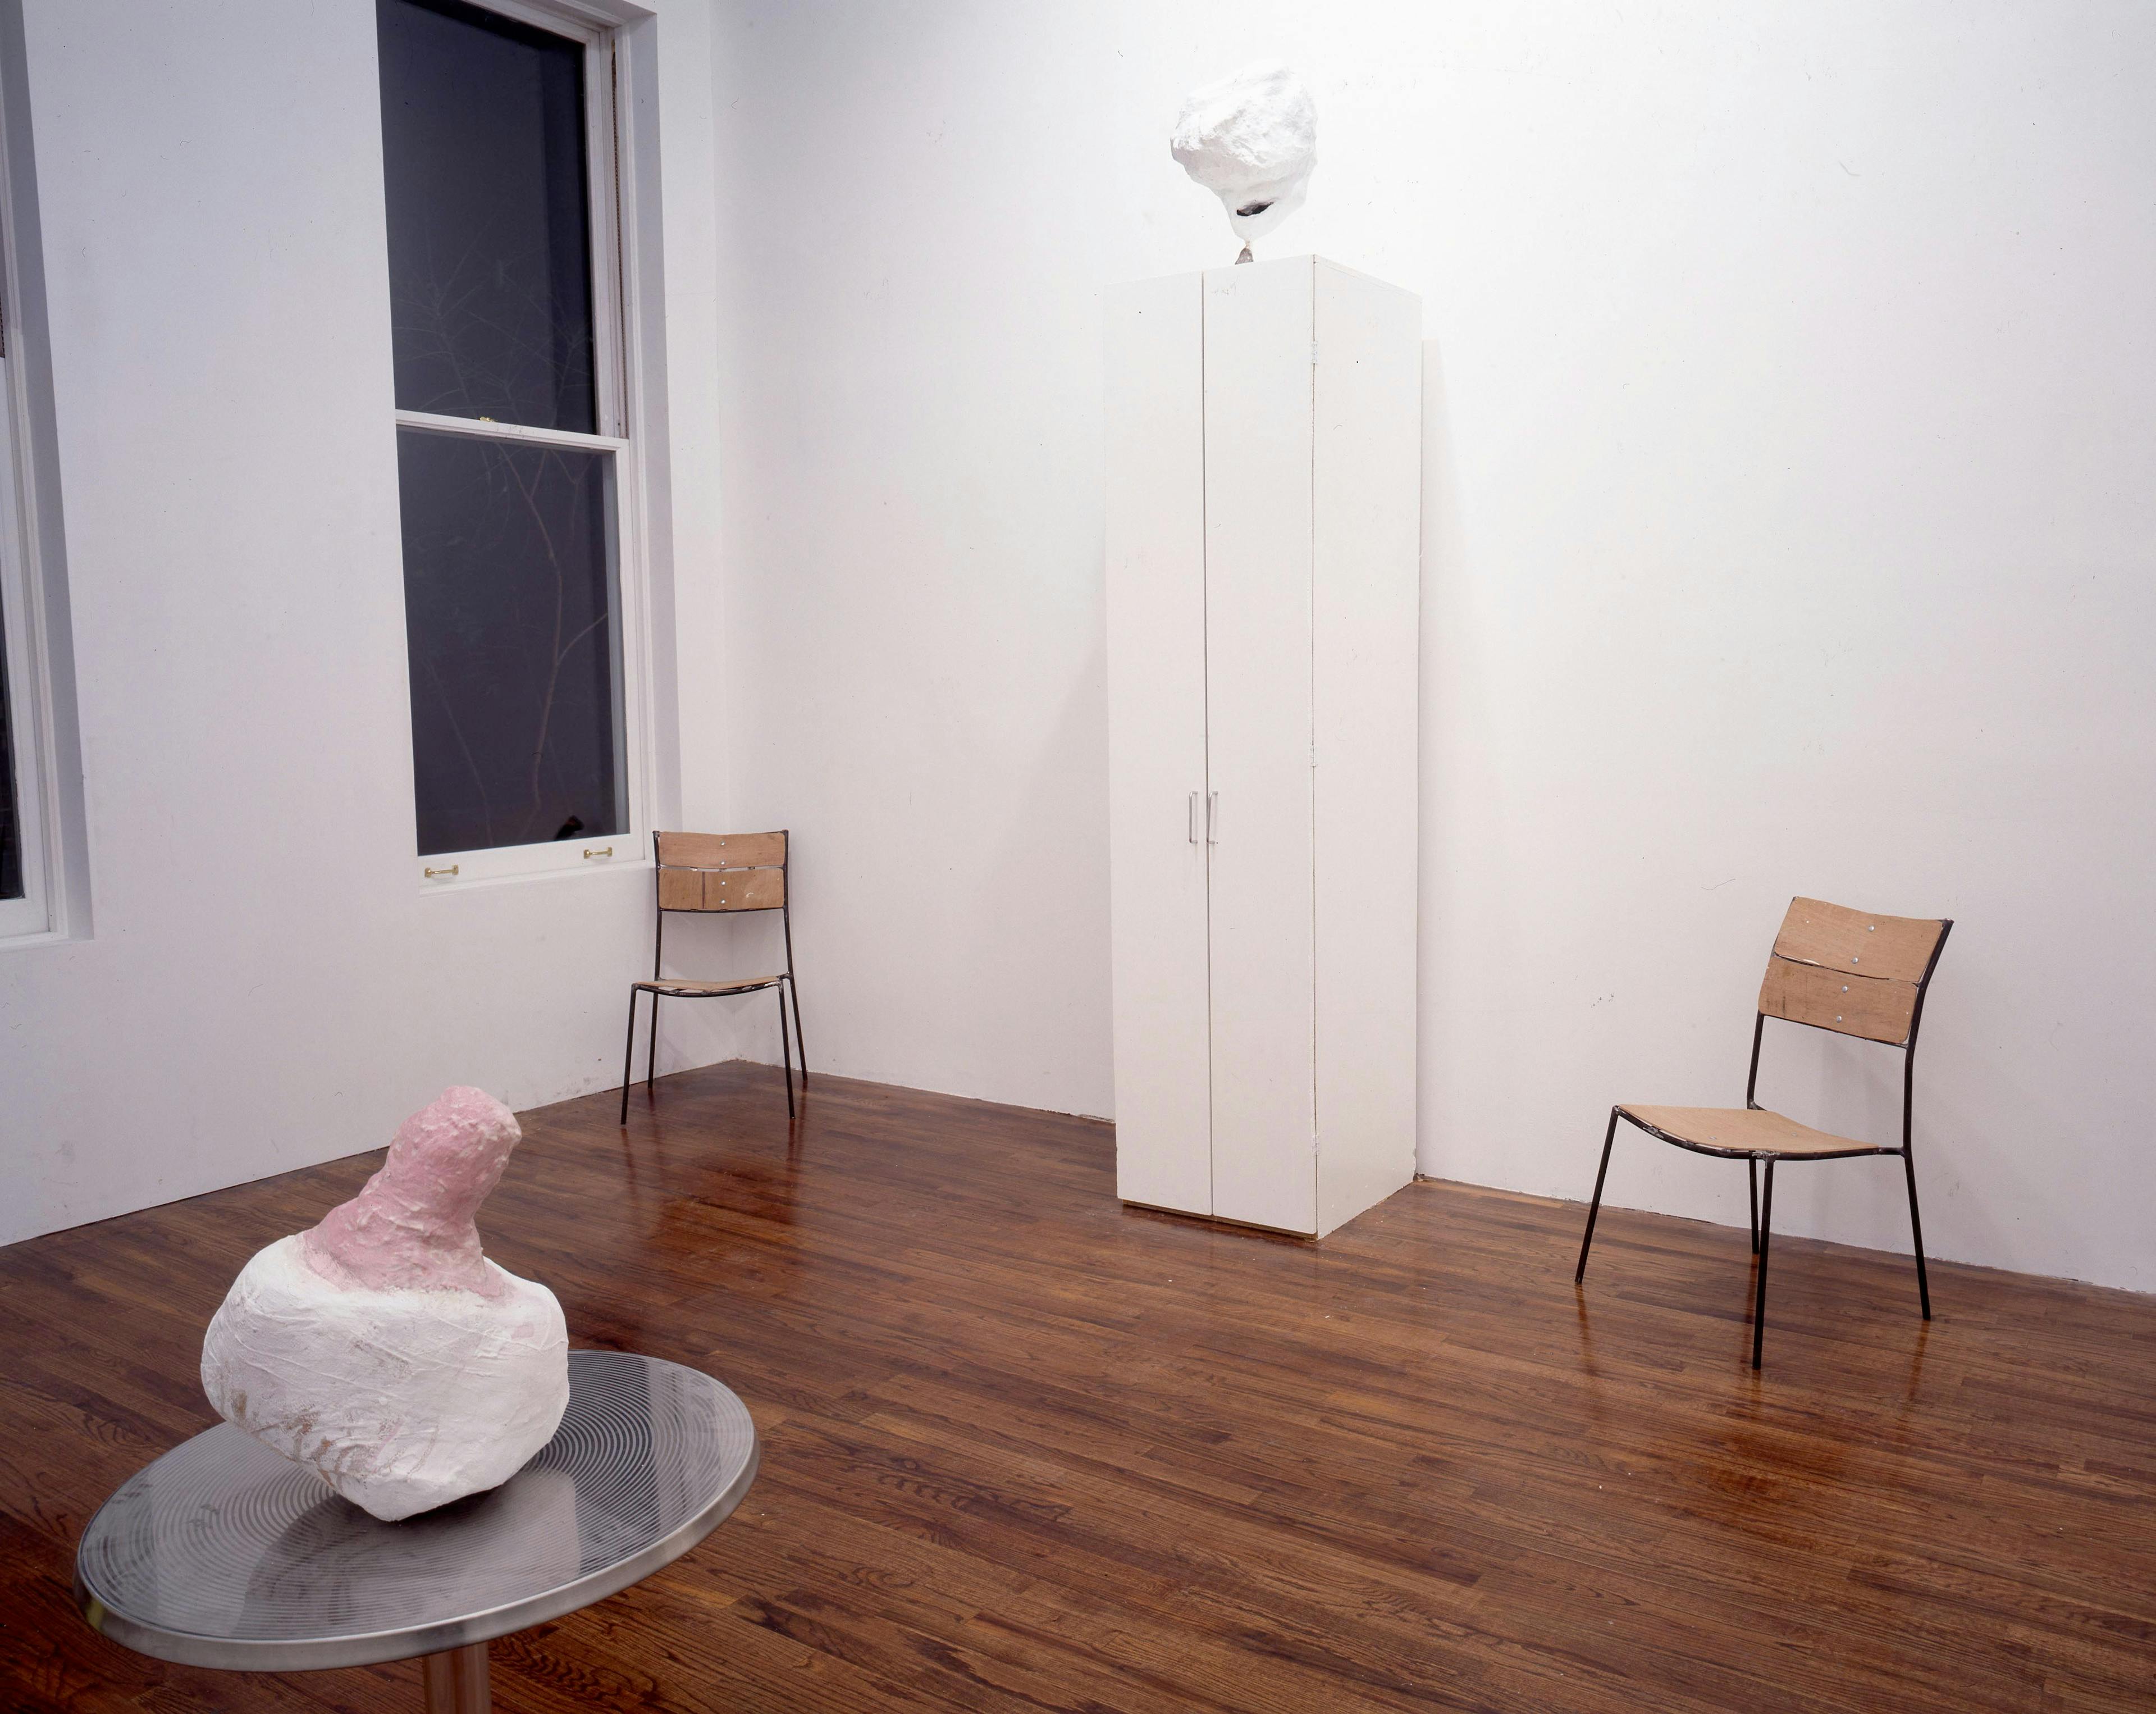 Installation view of the exhibition, Franz West: Home Elements (A Retrospective), at David Zwirner on 43 Greene Street, dated 1994.